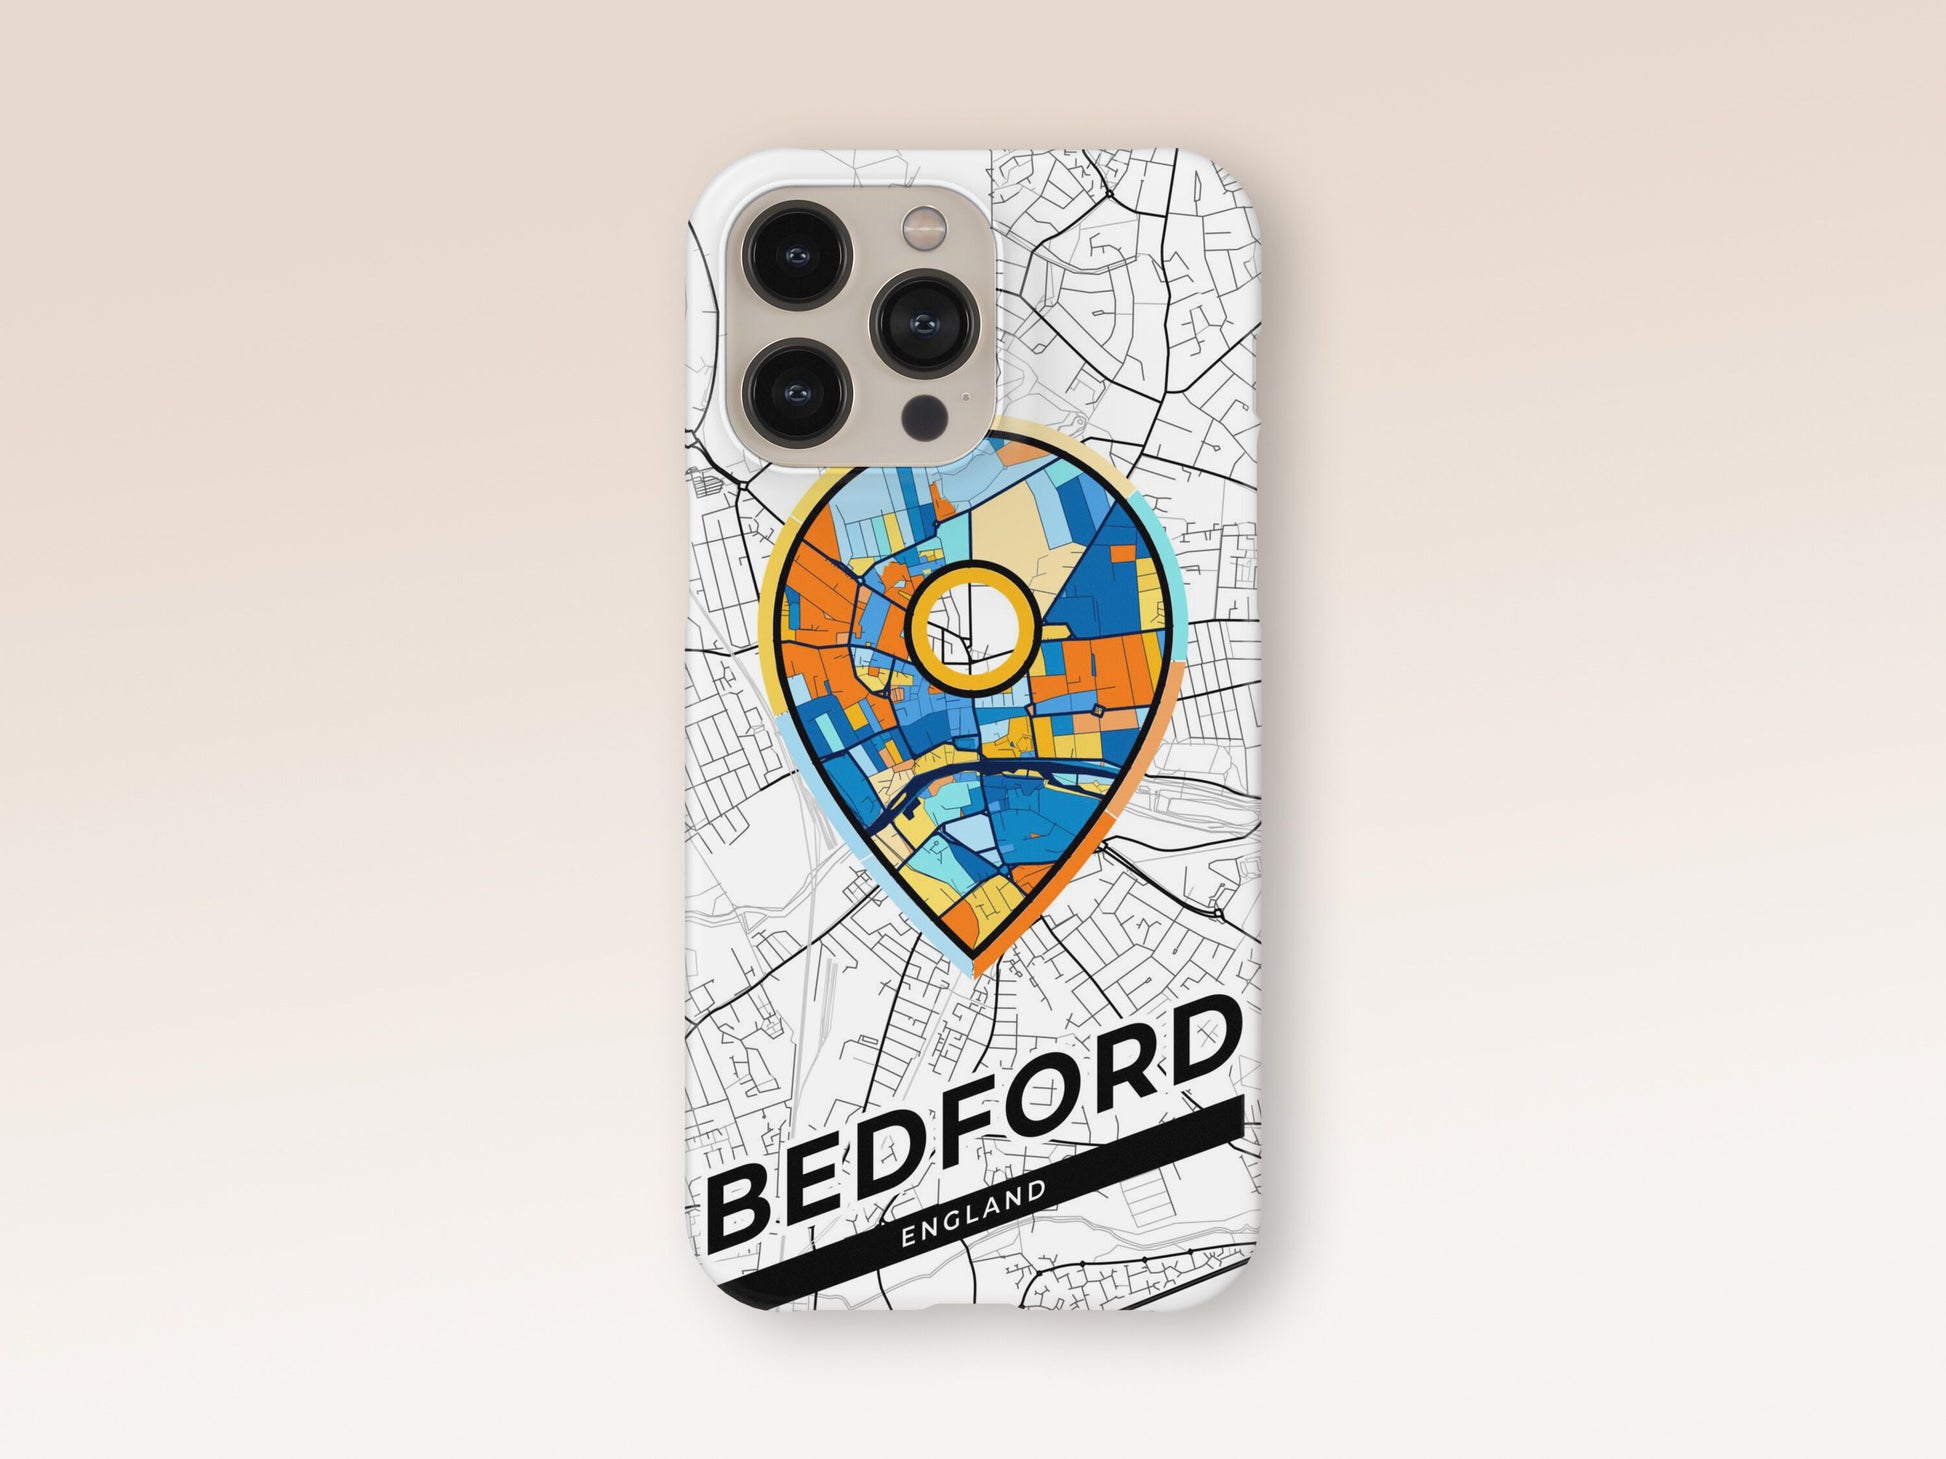 Bedford England slim phone case with colorful icon. Birthday, wedding or housewarming gift. Couple match cases. 1